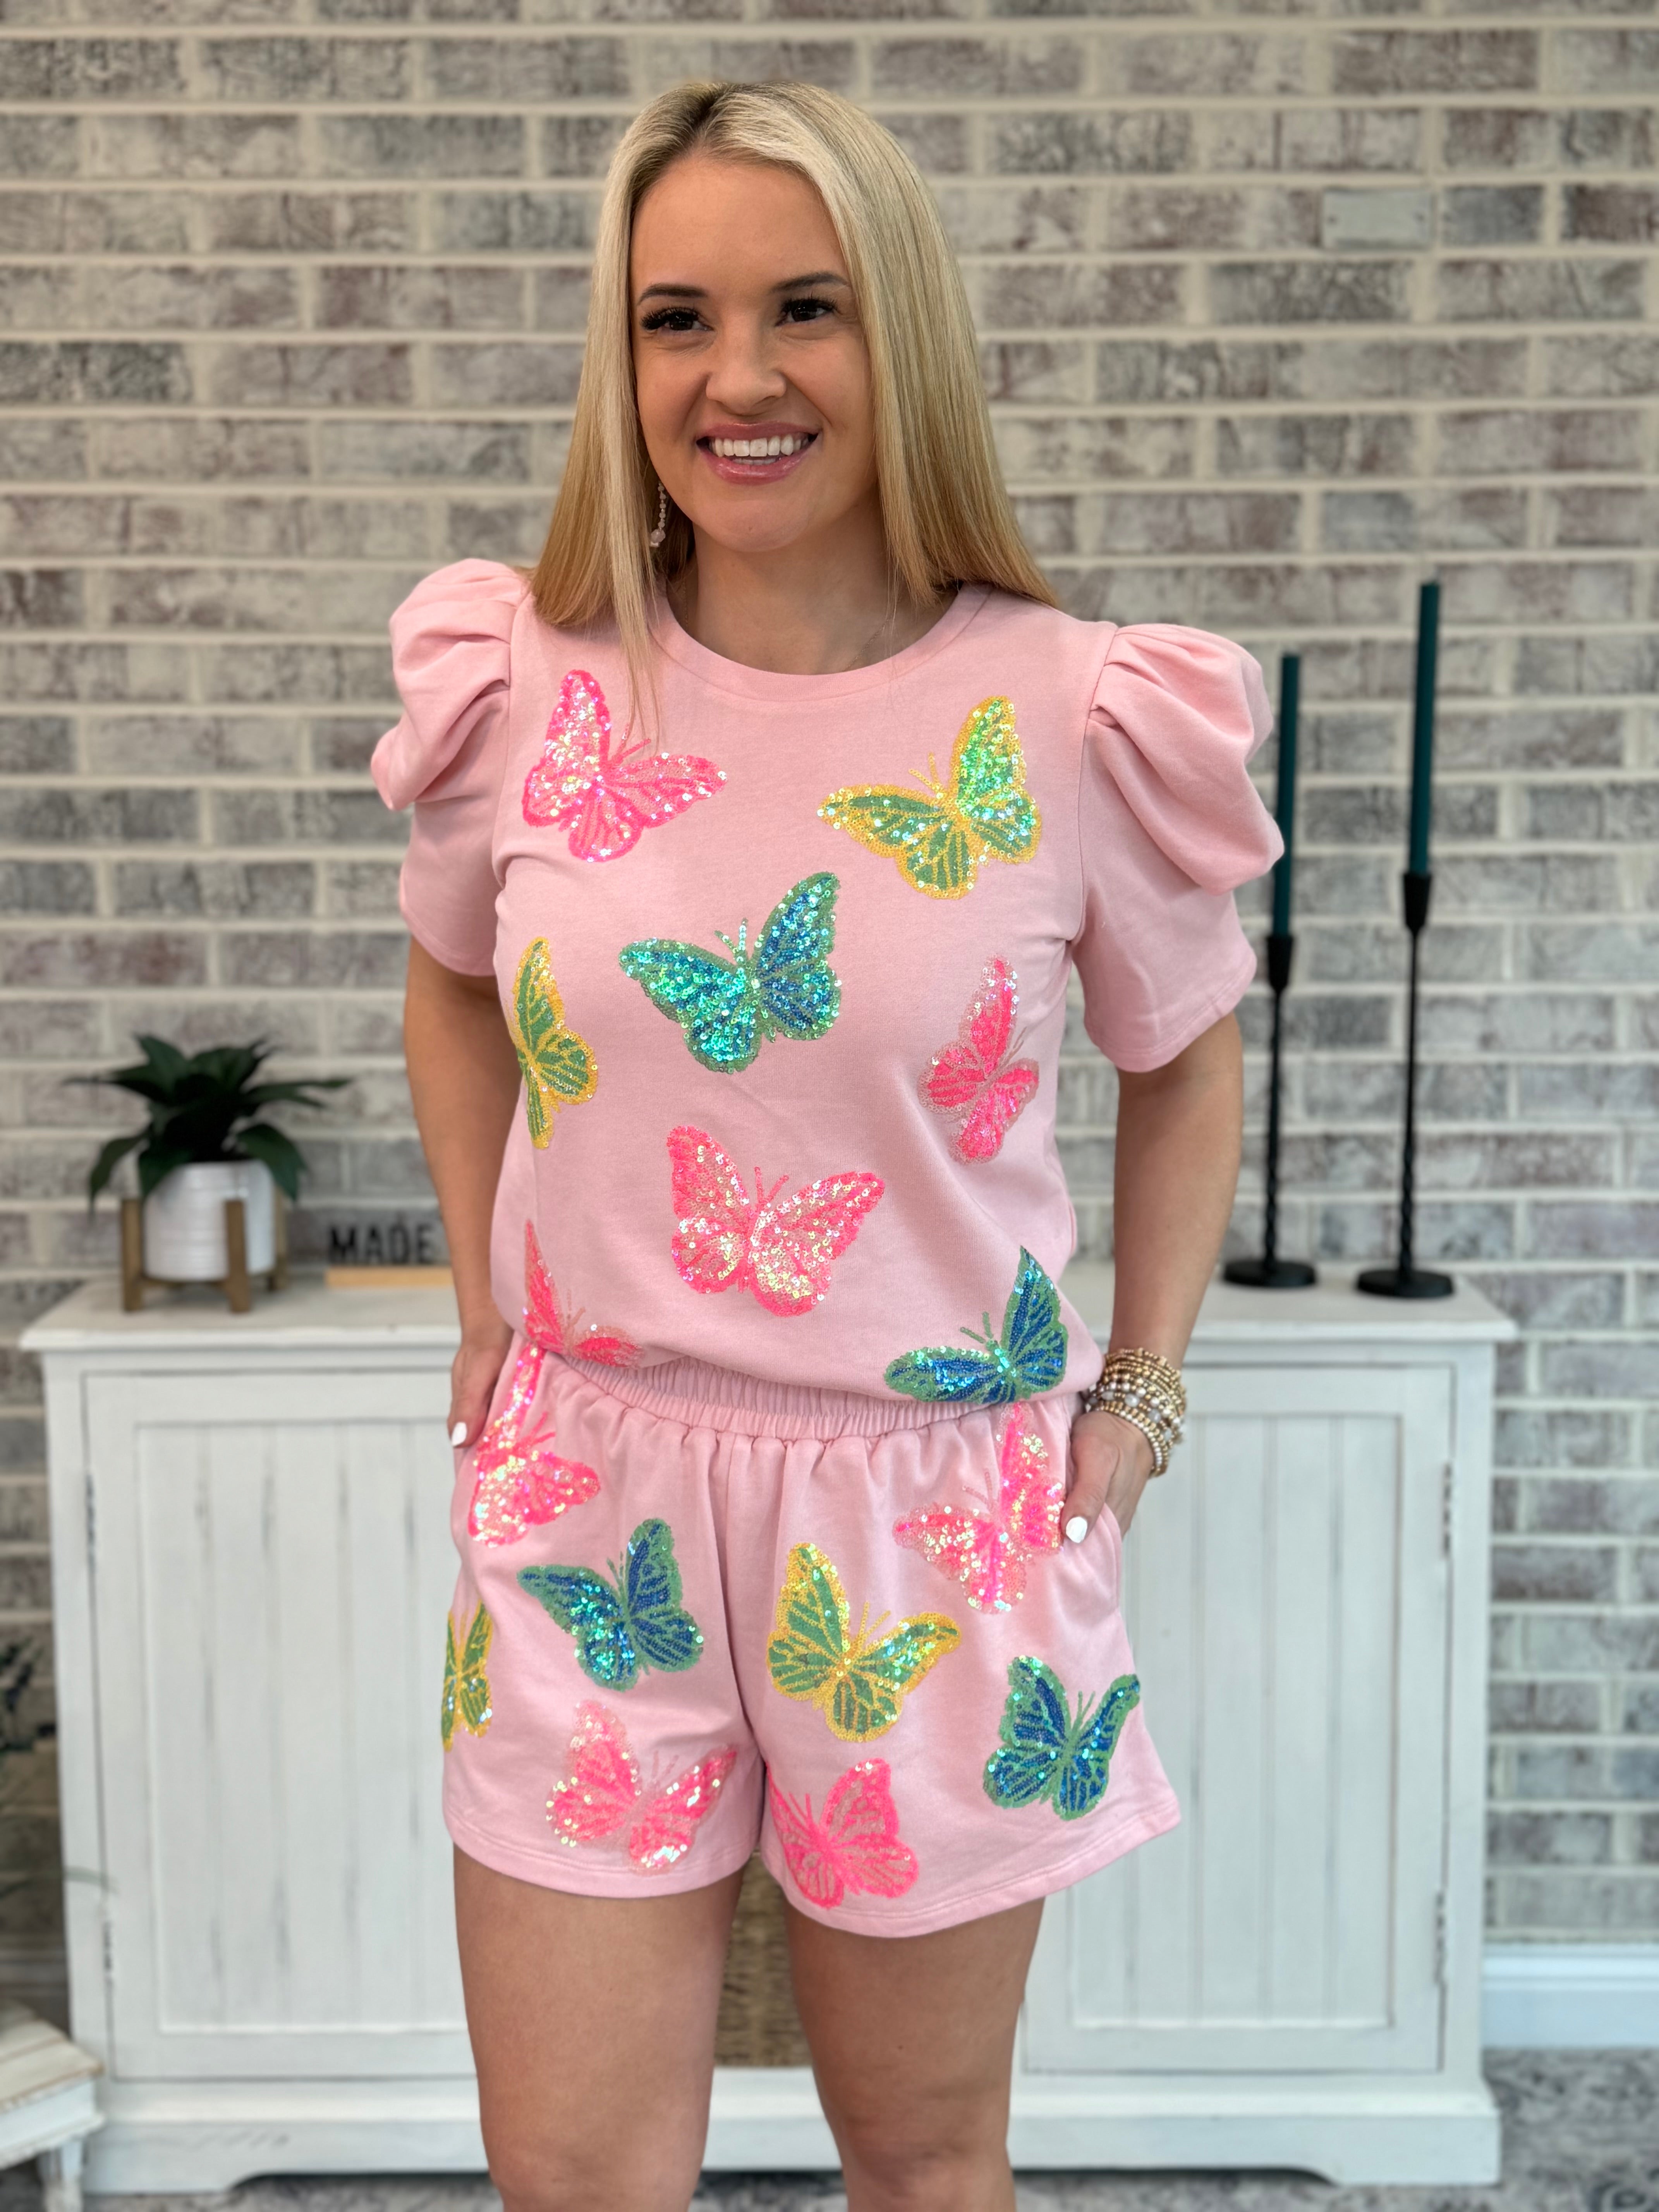 Butterfly Confetti Sequin Short Sleeve Top-100 Short Sleeve Tops-The Lovely Closet-The Lovely Closet, Women's Fashion Boutique in Alexandria, KY